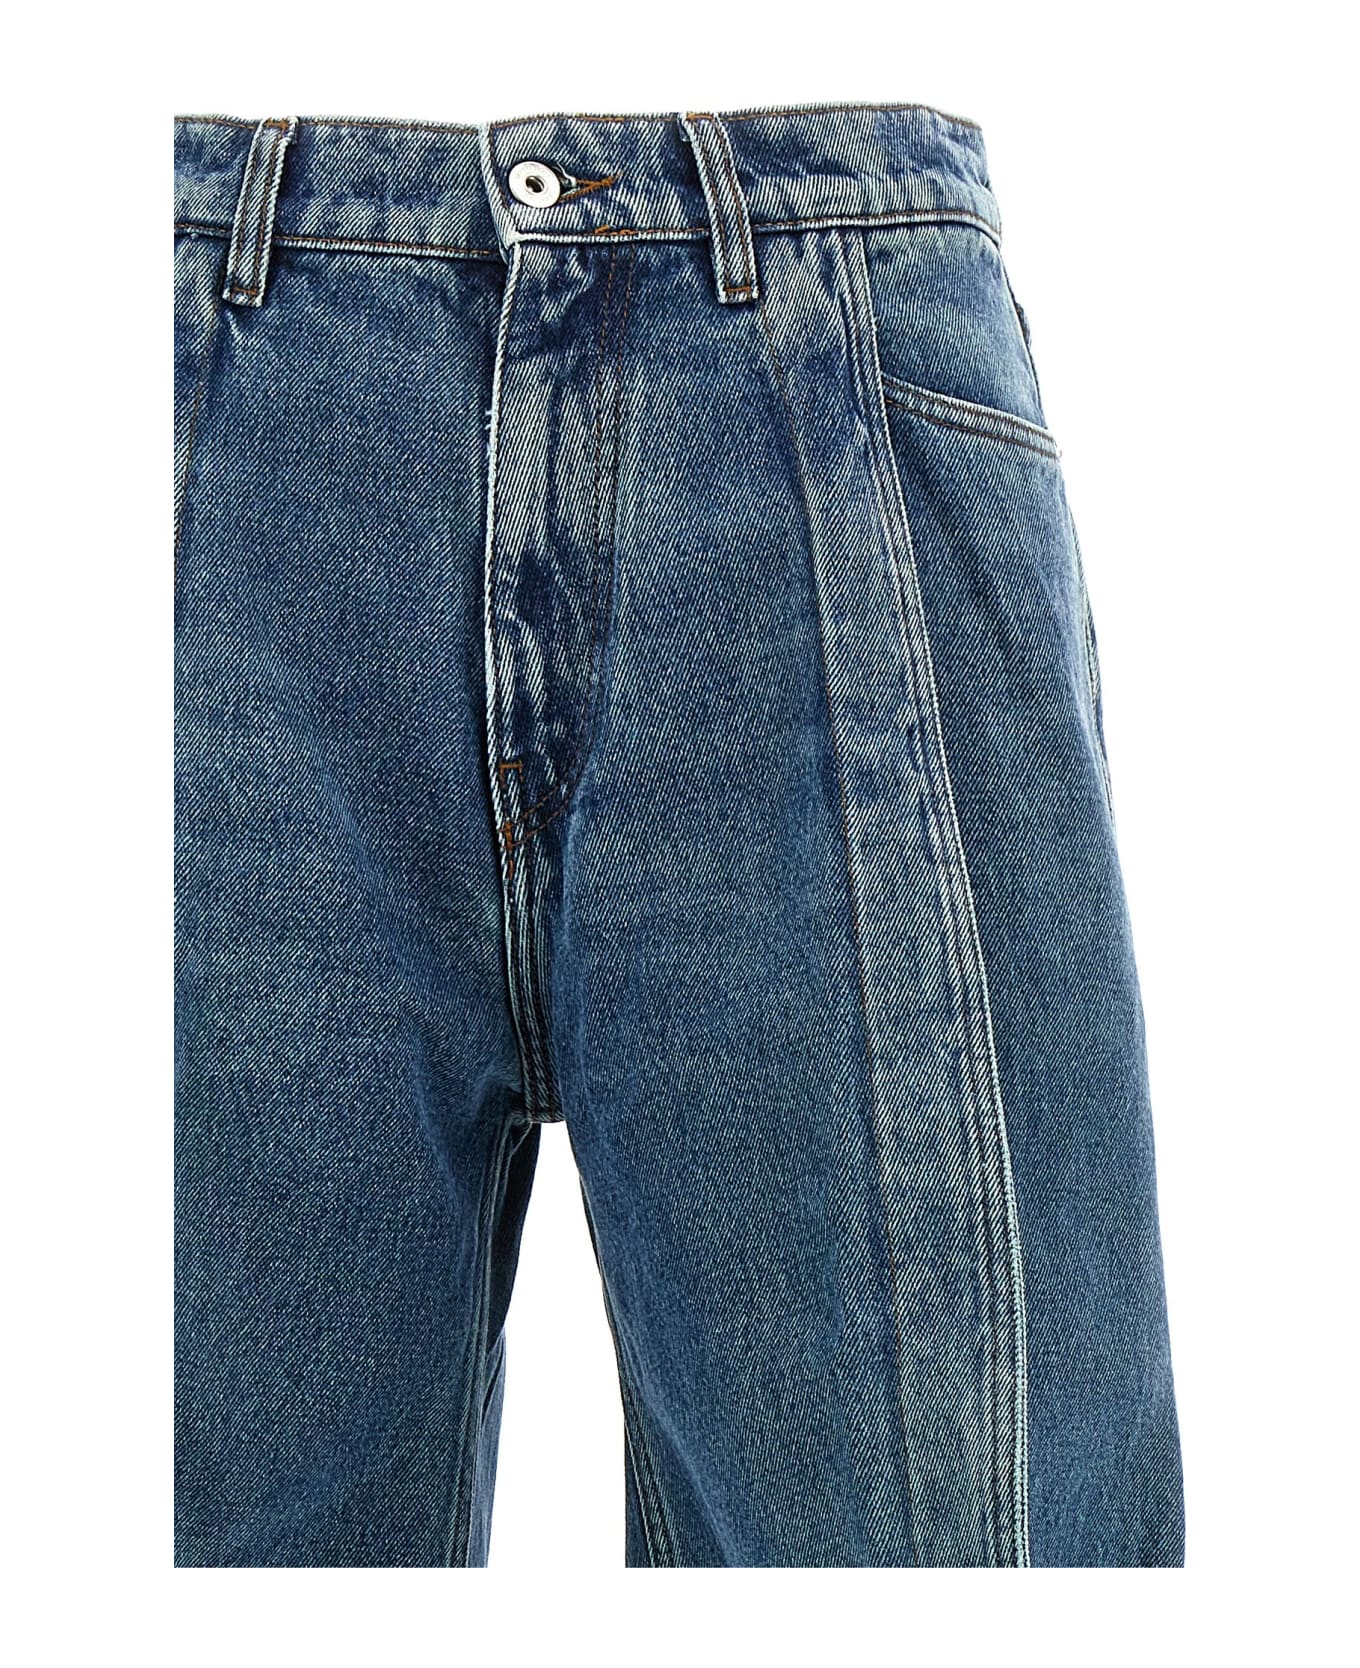 Y/Project 'evergreen Banana Jeans' Jeans - Blue デニム